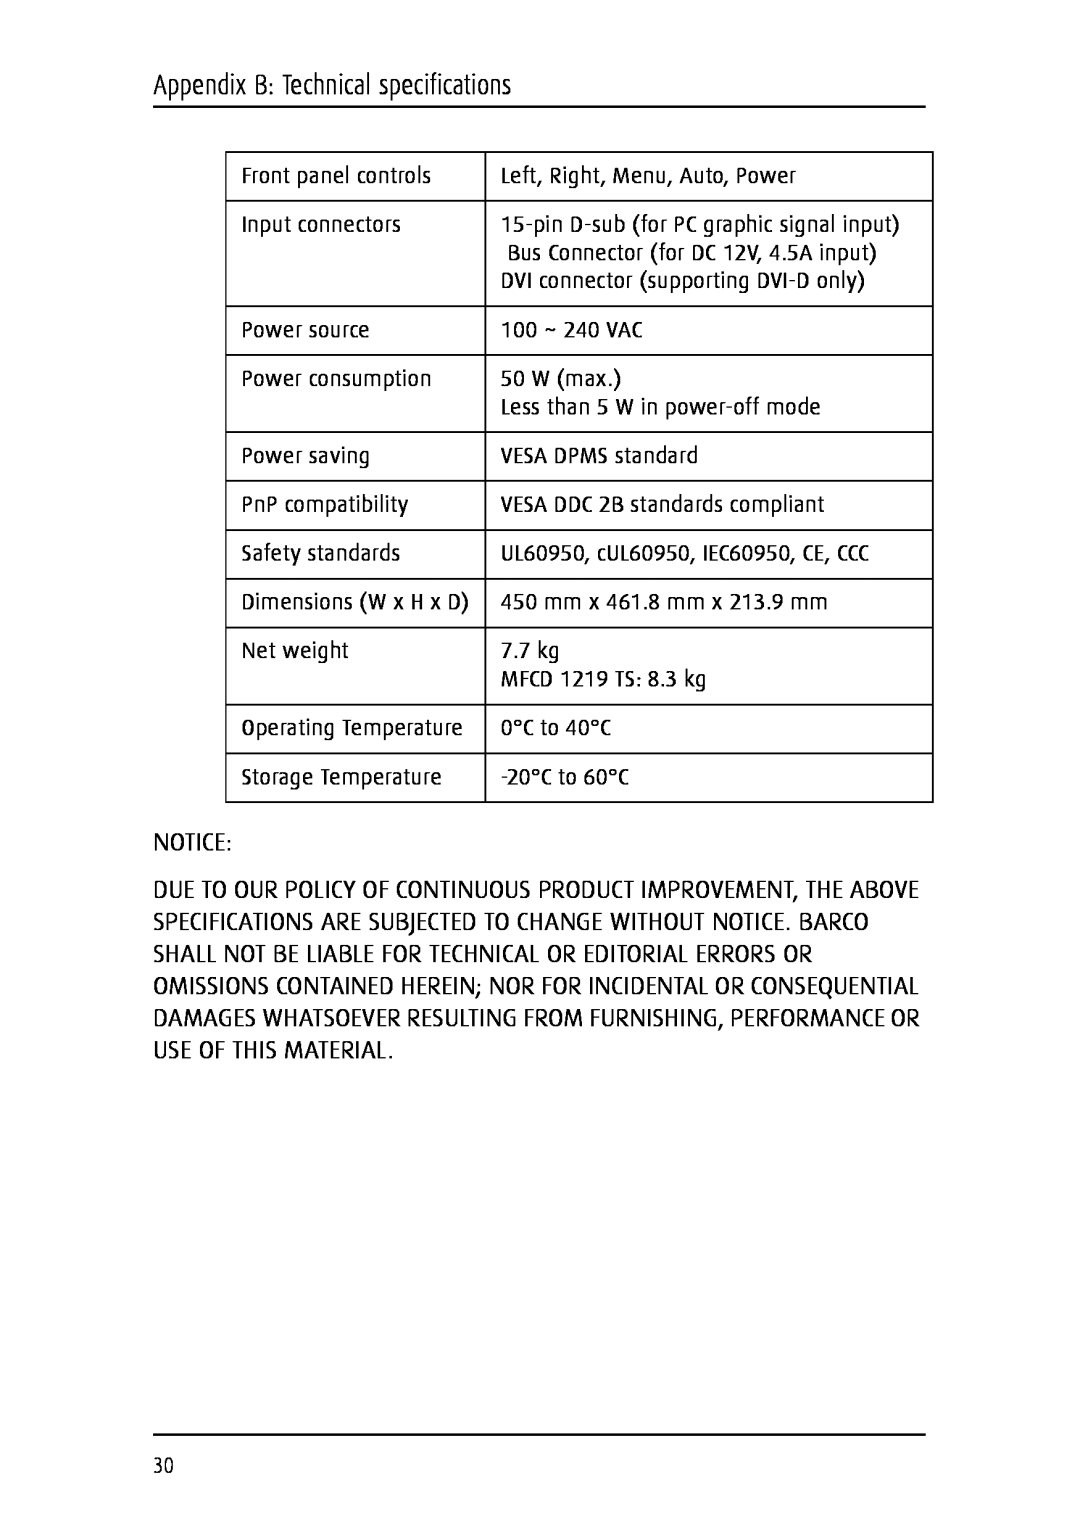 Barco 1219 user manual Appendix B Technical specifications, Front panel controls 